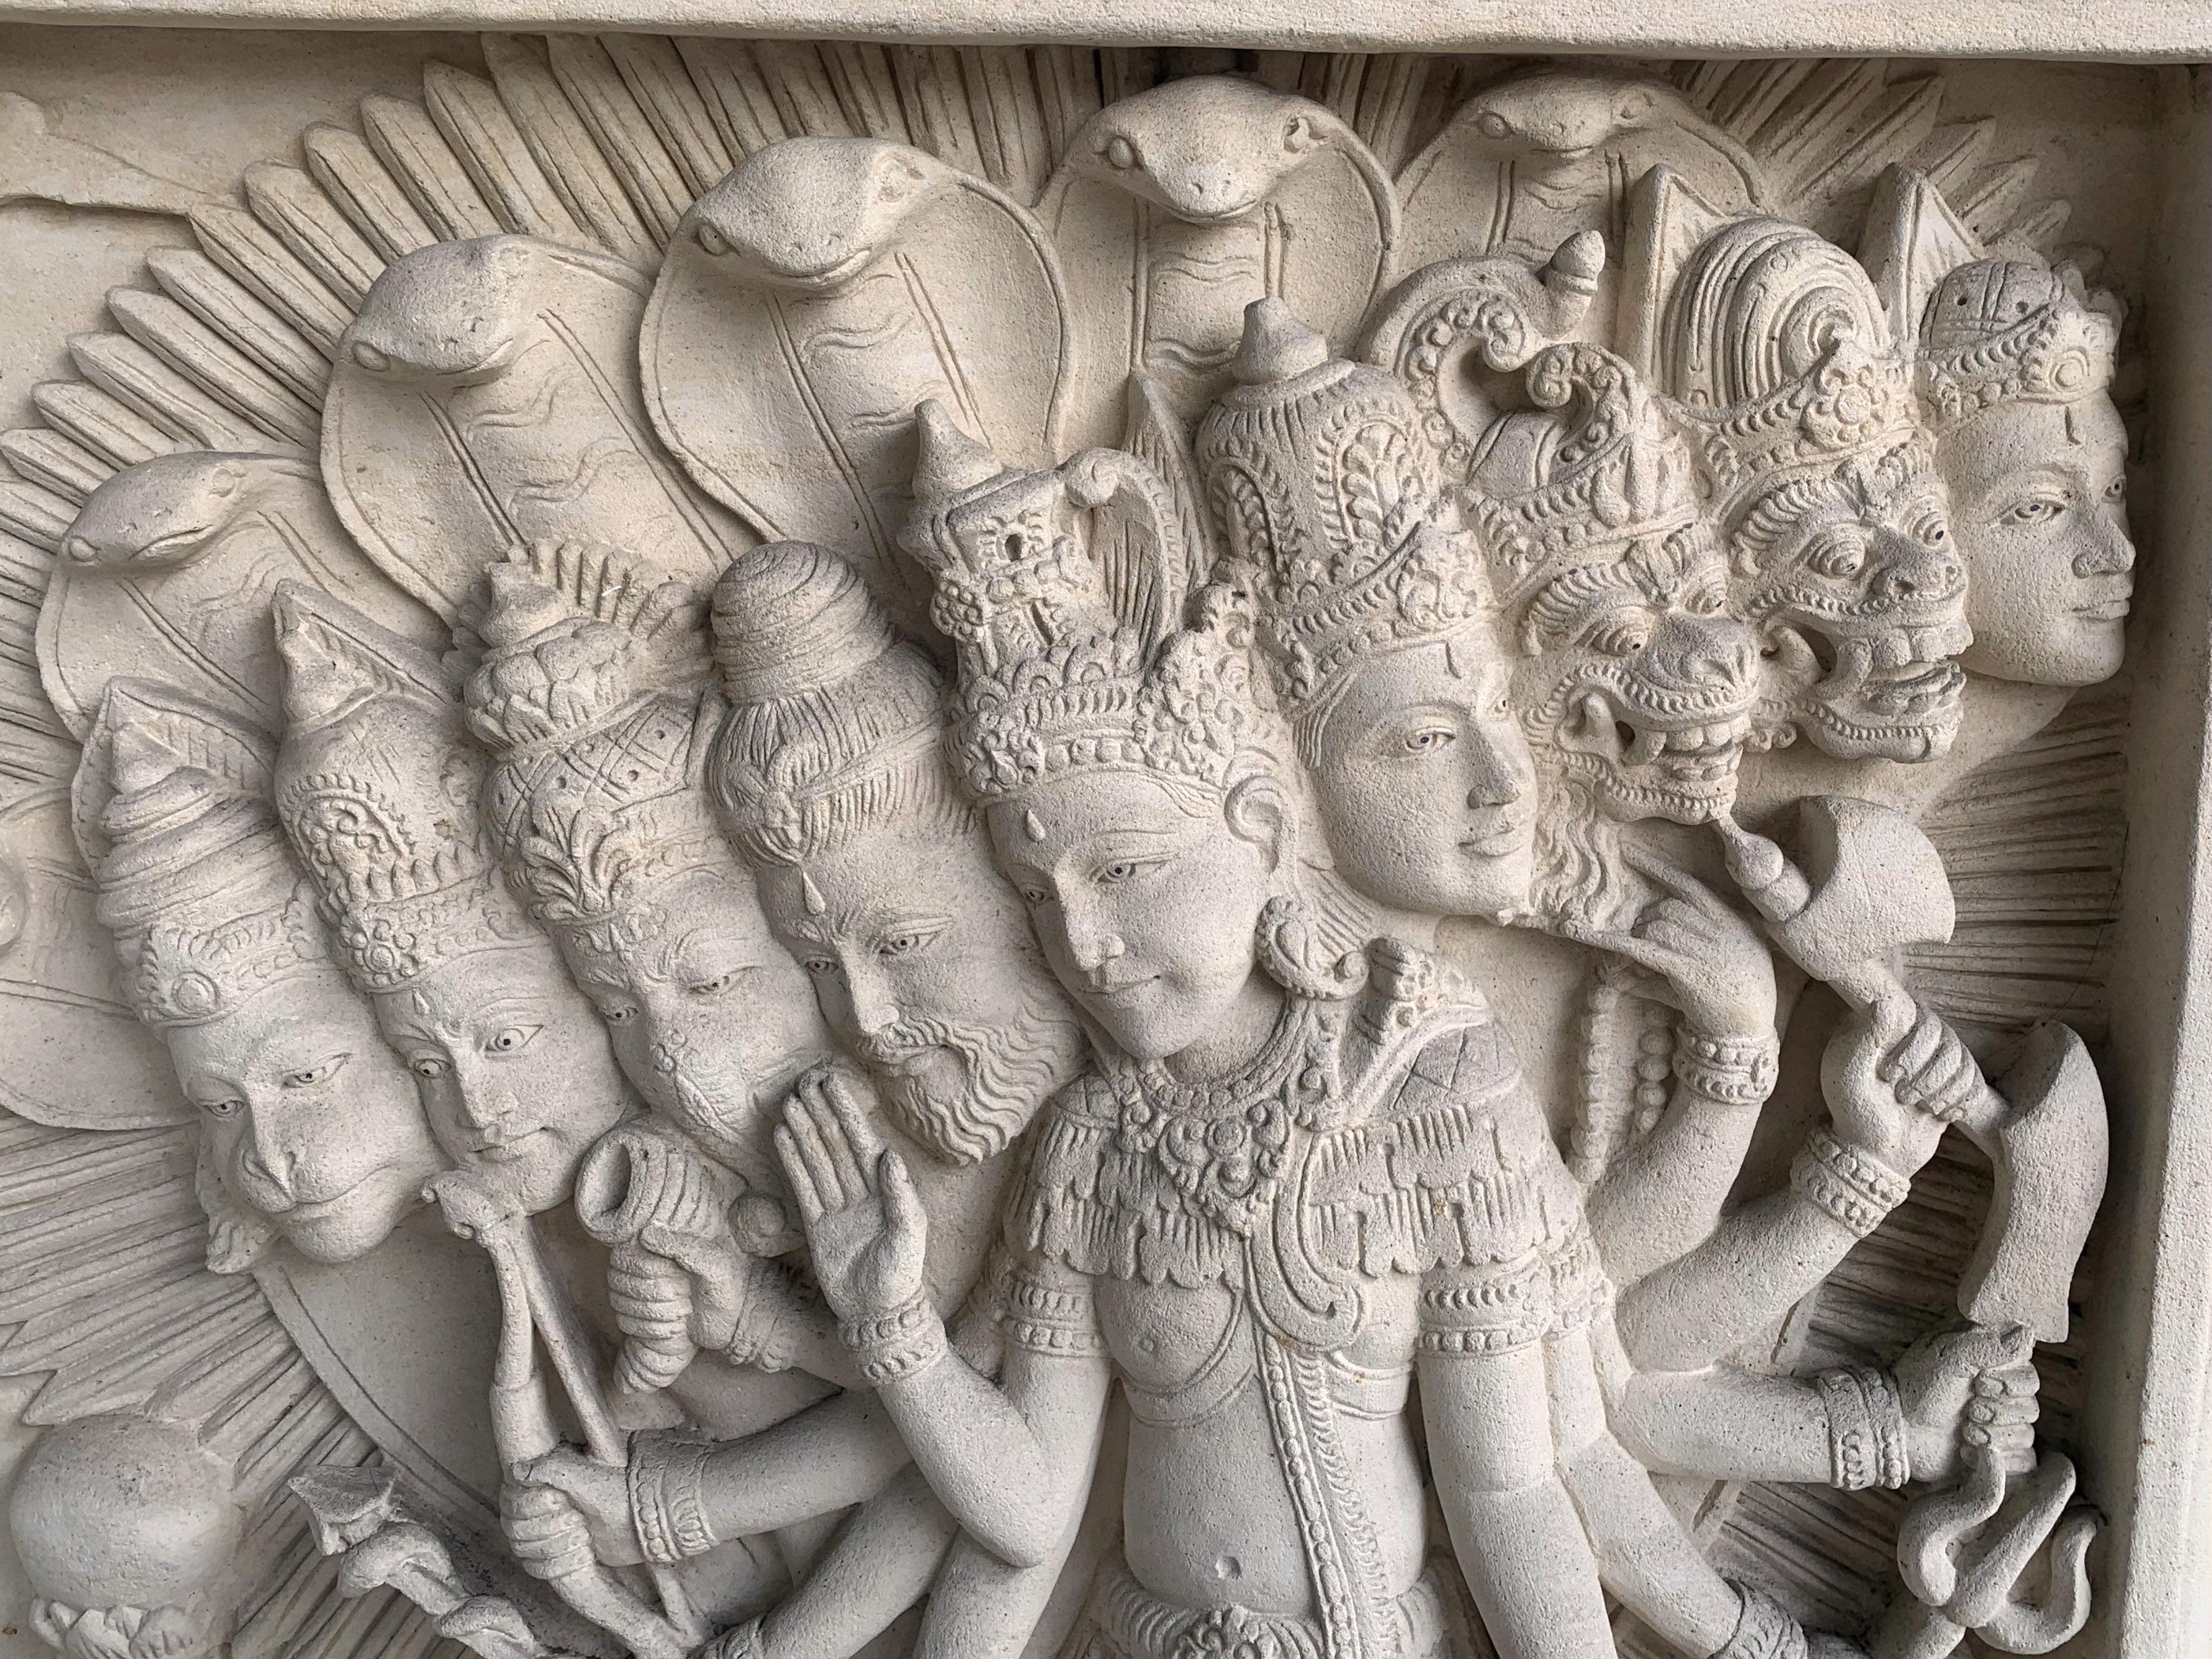 Hand-Carved Sandstone Carving with Hindu Gods from Bali 1